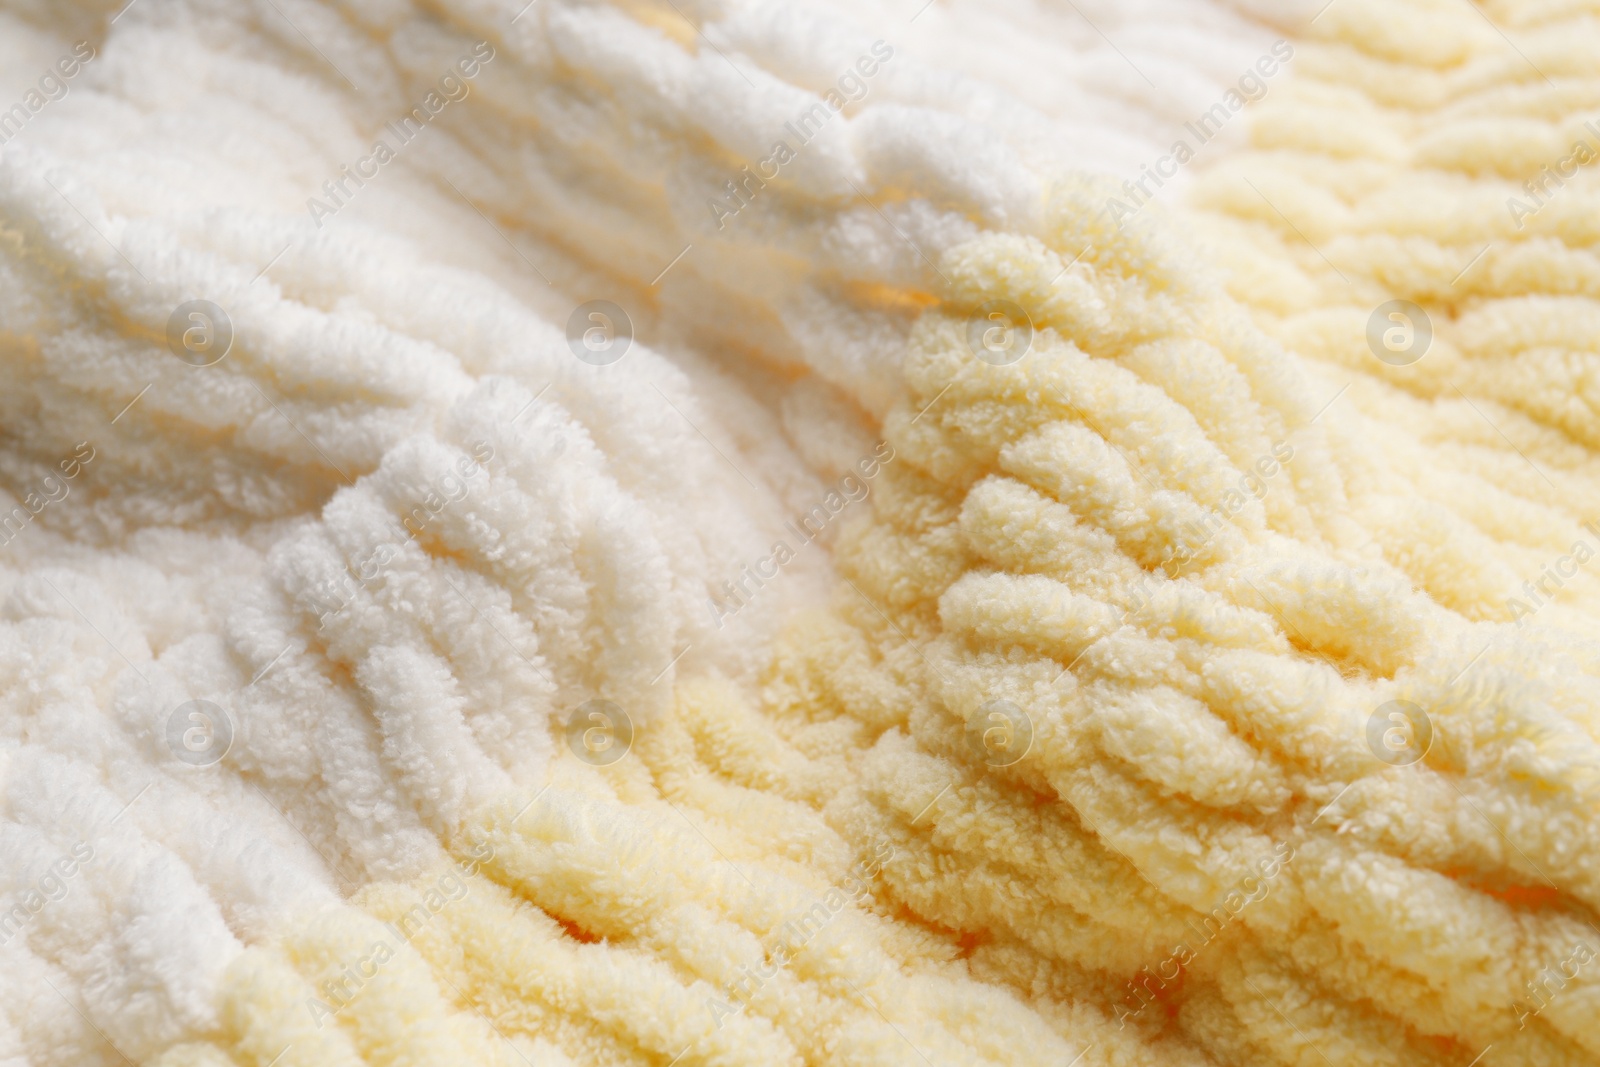 Photo of Texture of soft knitted fabric as background, closeup